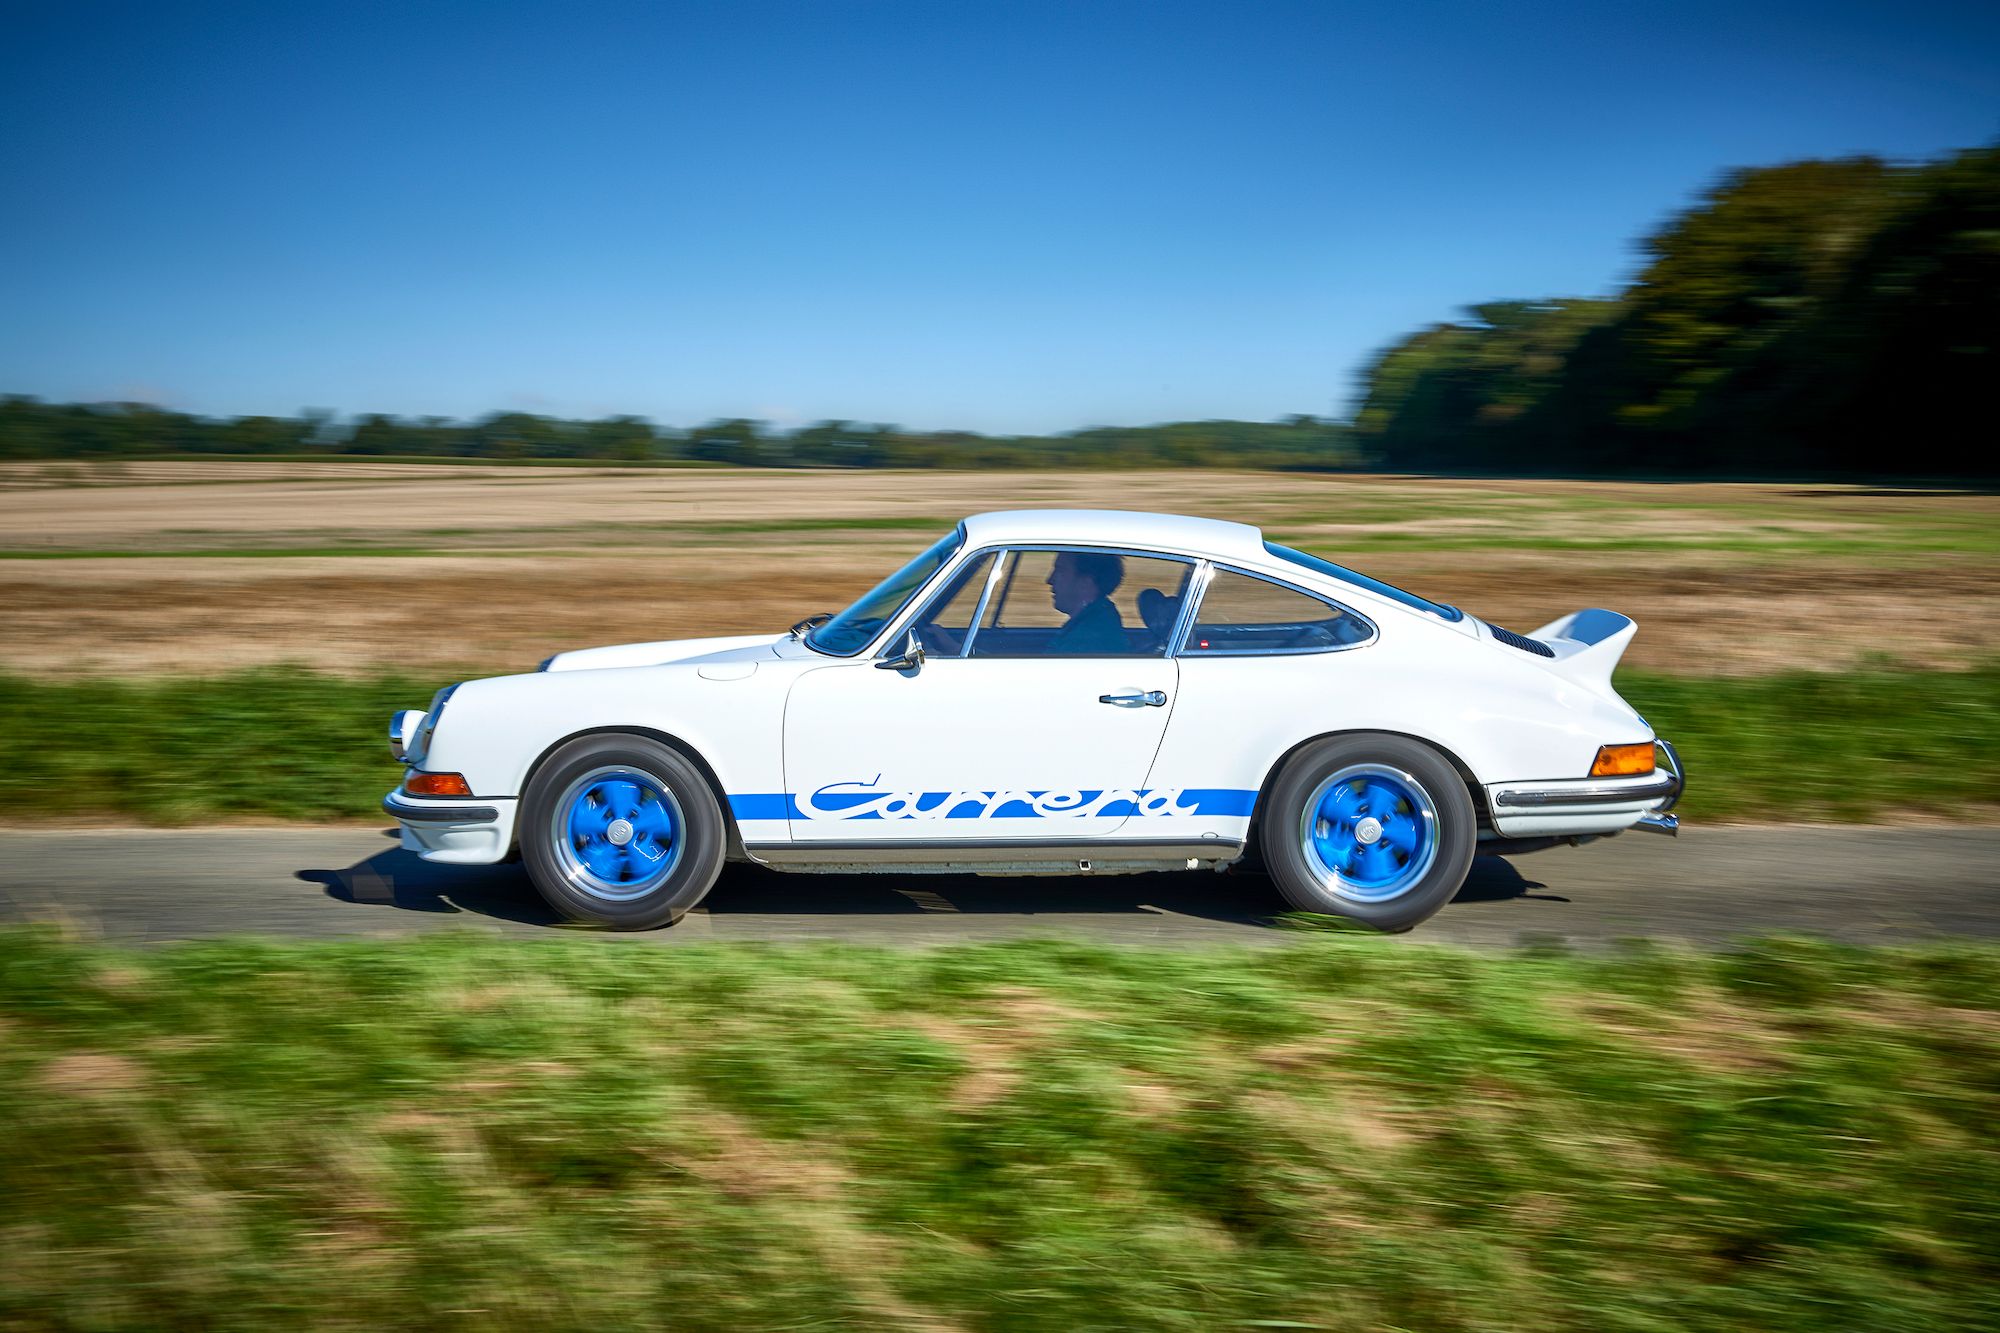 1973 Porsche 911 2.7 RS Touring Previously Sold | Will Stone Historic Cars